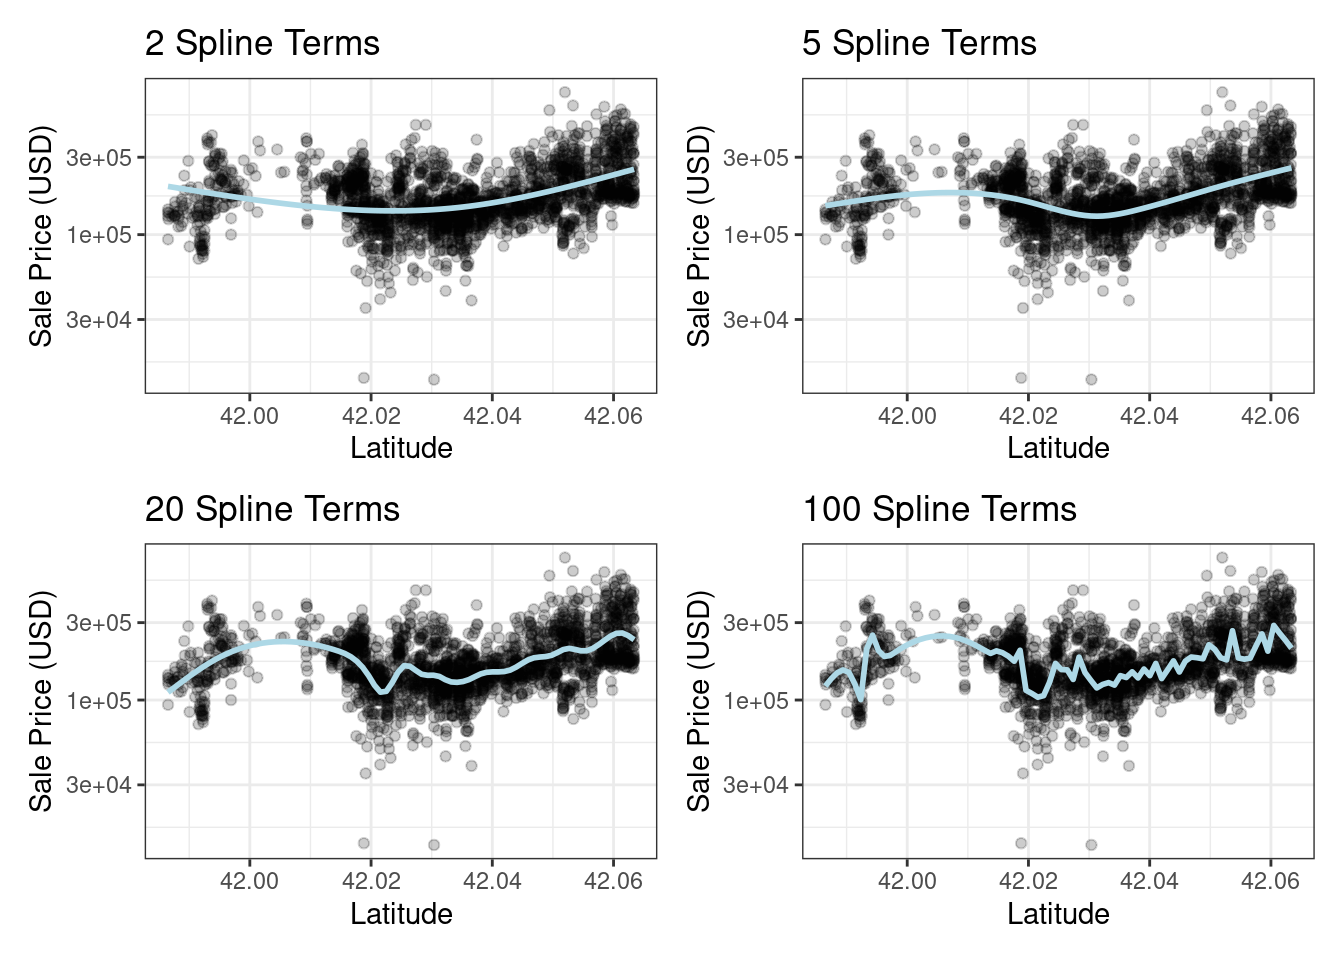 Scatter plots of sale price versus latitude with trend lines using natural splines with different degrees of freedom. As the degrees of freedom increase, the lines are more responsive to trends in the data but begin to become excessively complex with 100 spline terms.